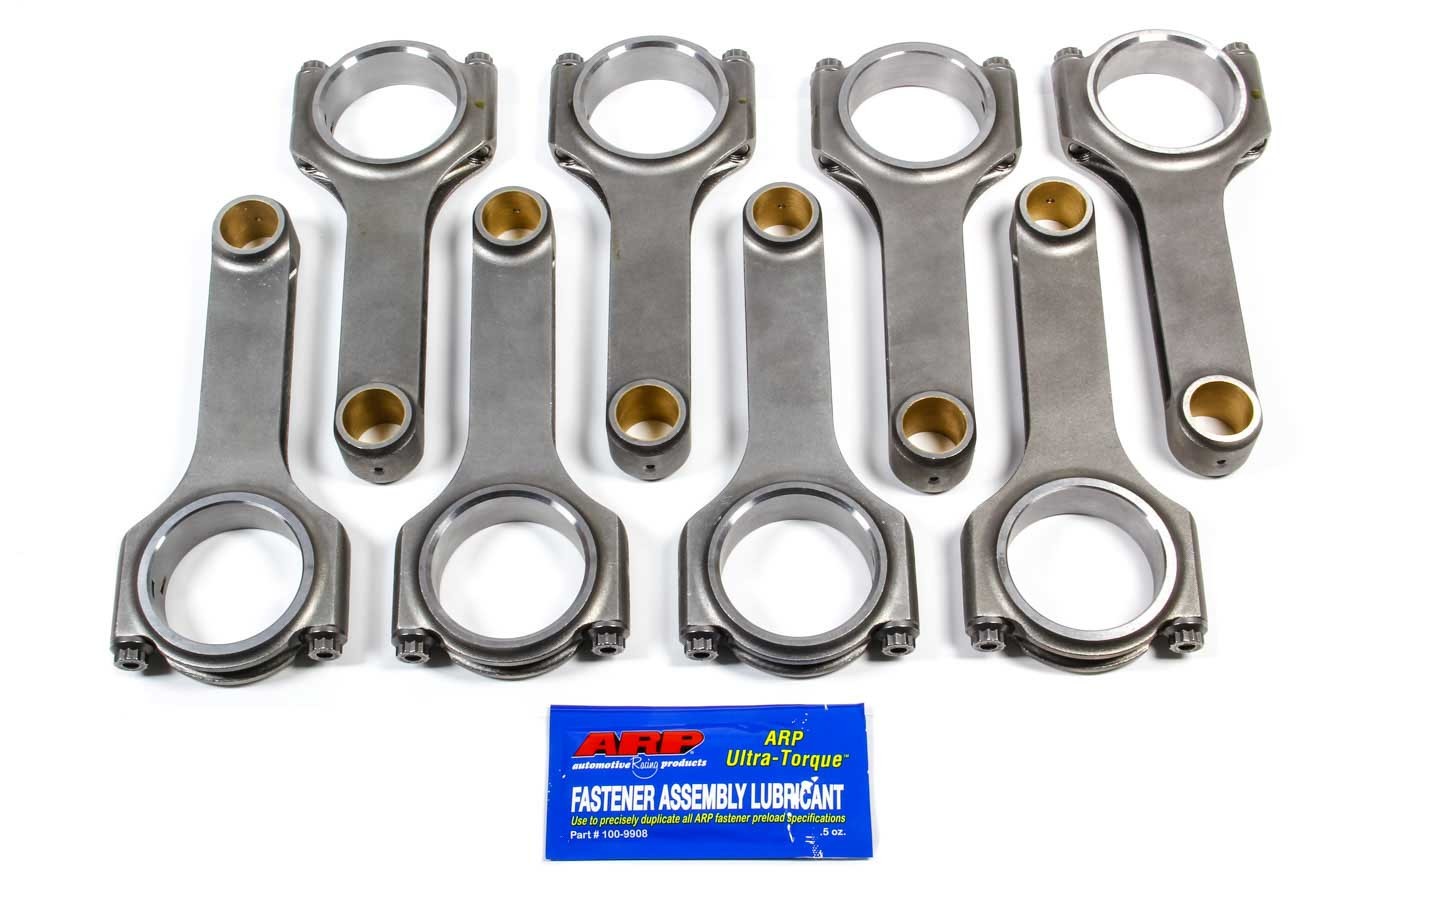 Scat 2-350-6000-2100A - Connecting Rod, Pro Sport, H Beam, 6.000 in Long, Bushed, 7/16 in Cap Screws, ARP2000, Forged Steel, Small Block Chevy, Set of 8